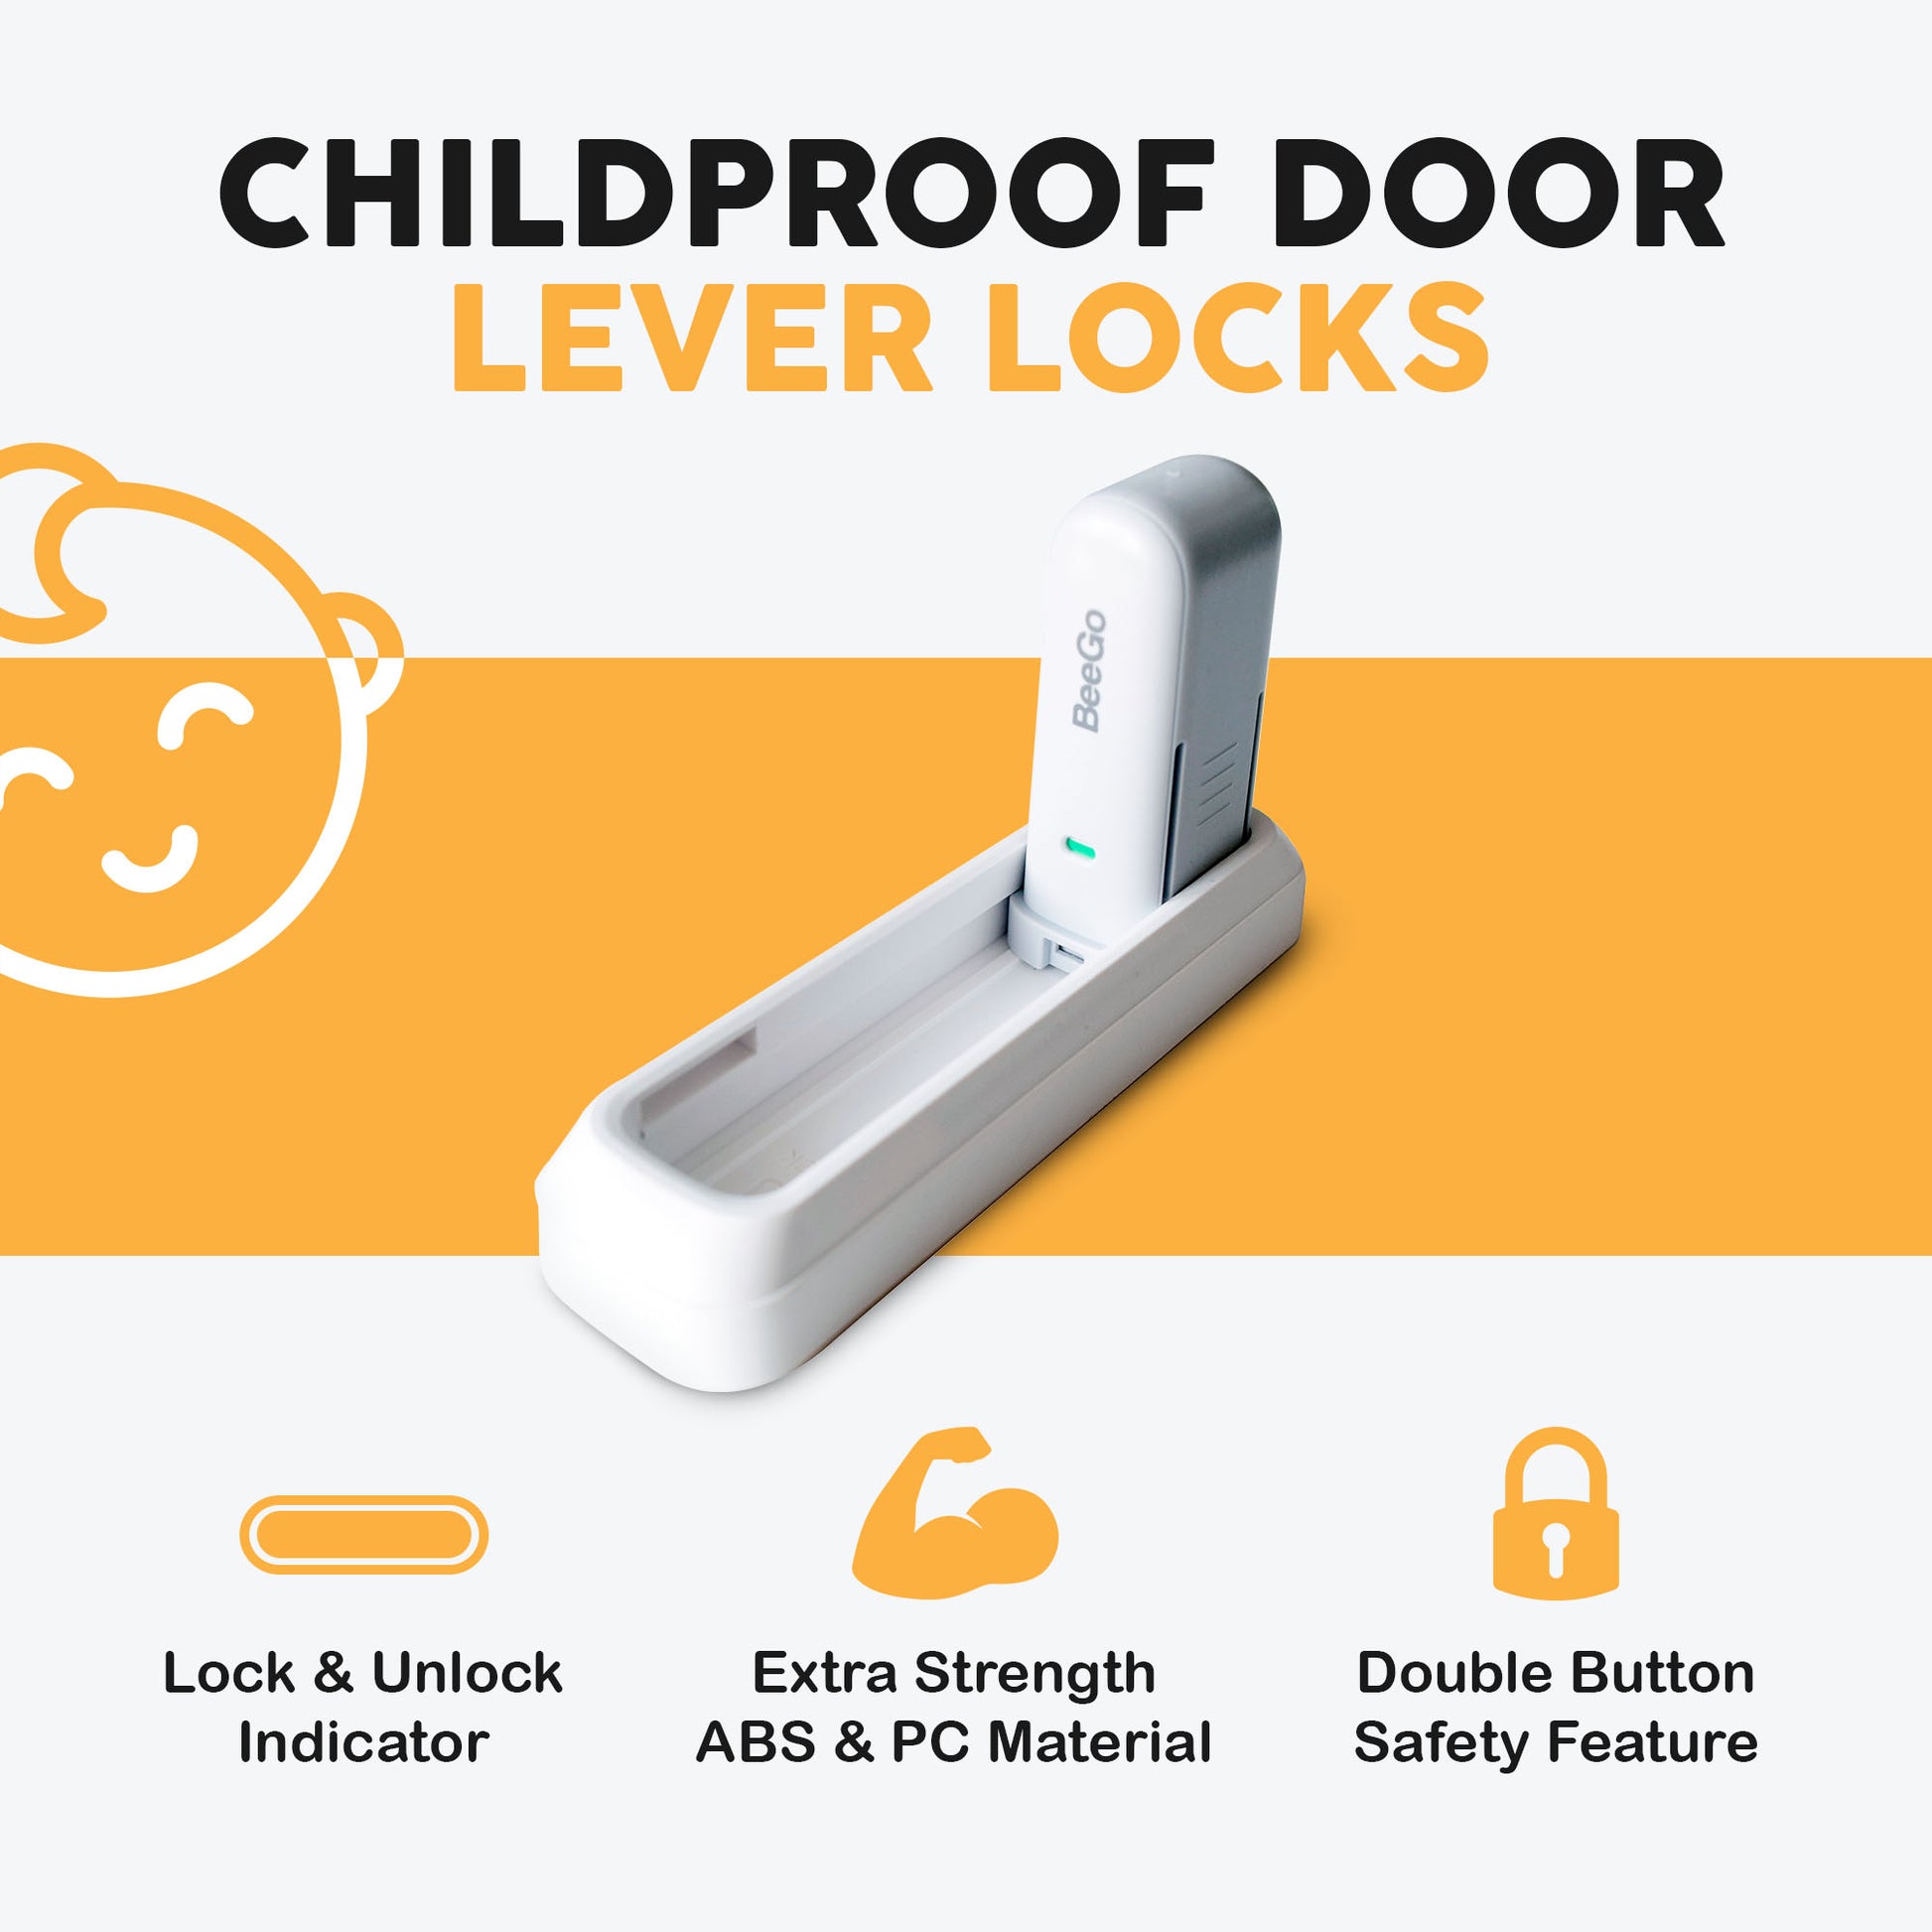 Baby Products Online - Improved door lock resistant to children Packages)  Prevents toddlers from opening doors. Easy operation with one hand for  adults. Durable abs with adhesive backup Simple installation, no tools